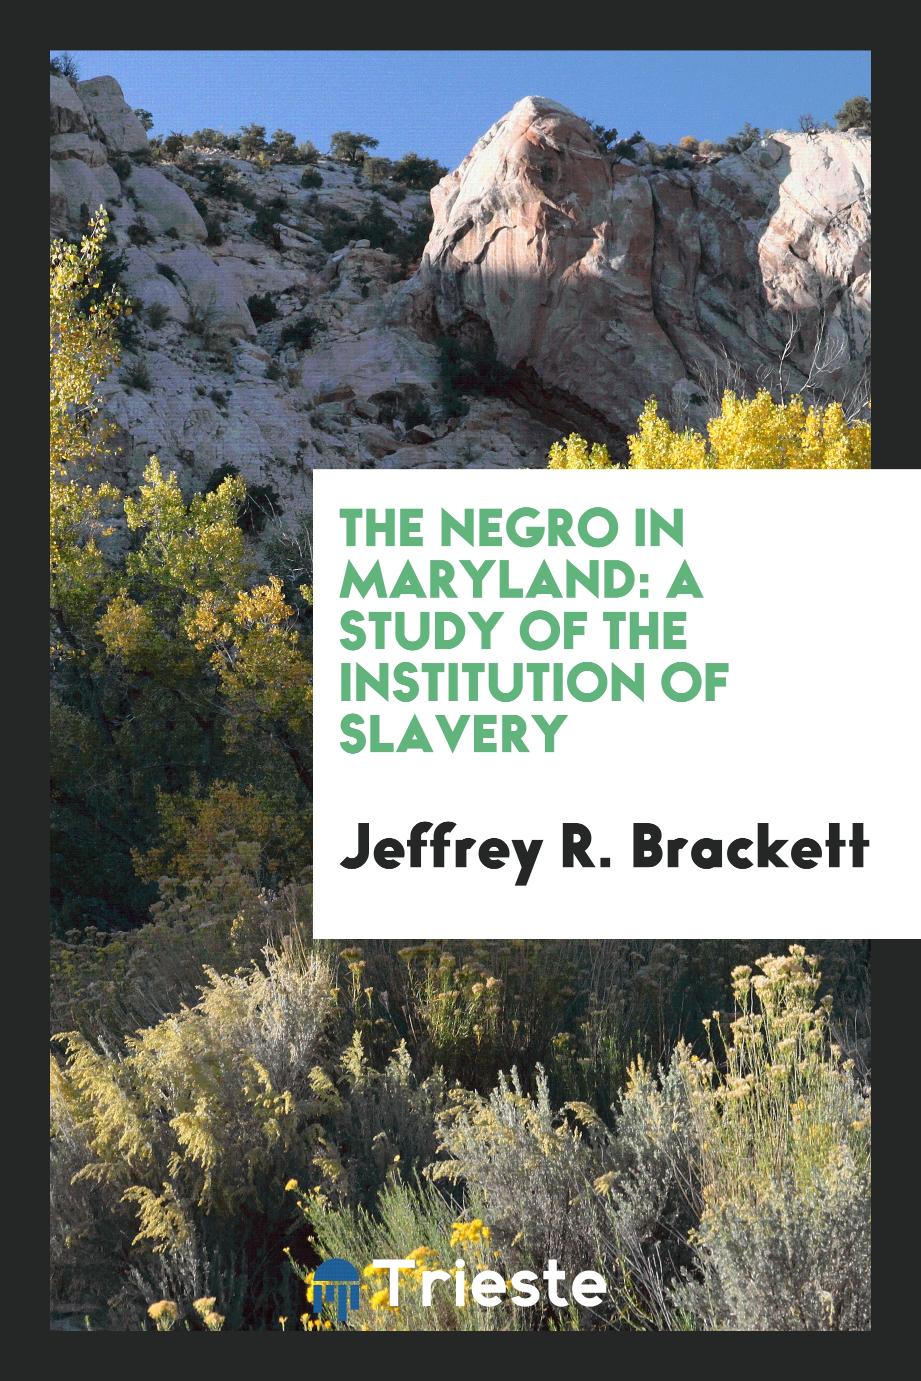 The Negro in Maryland: a study of the institution of slavery